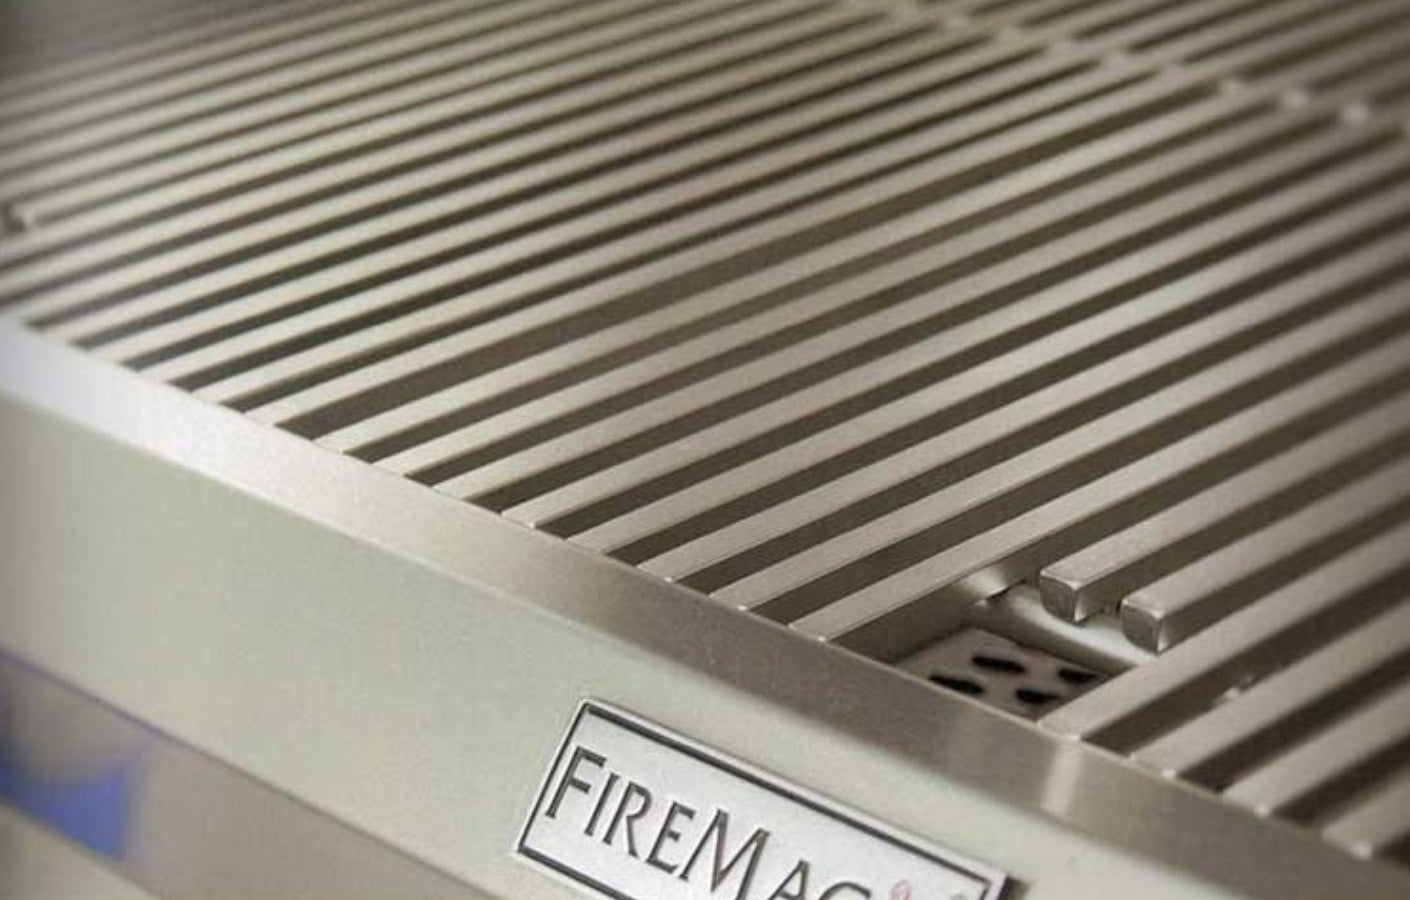 FireMagic Echelon E790i Built-In 36 in. Grill with Analog Thermometer